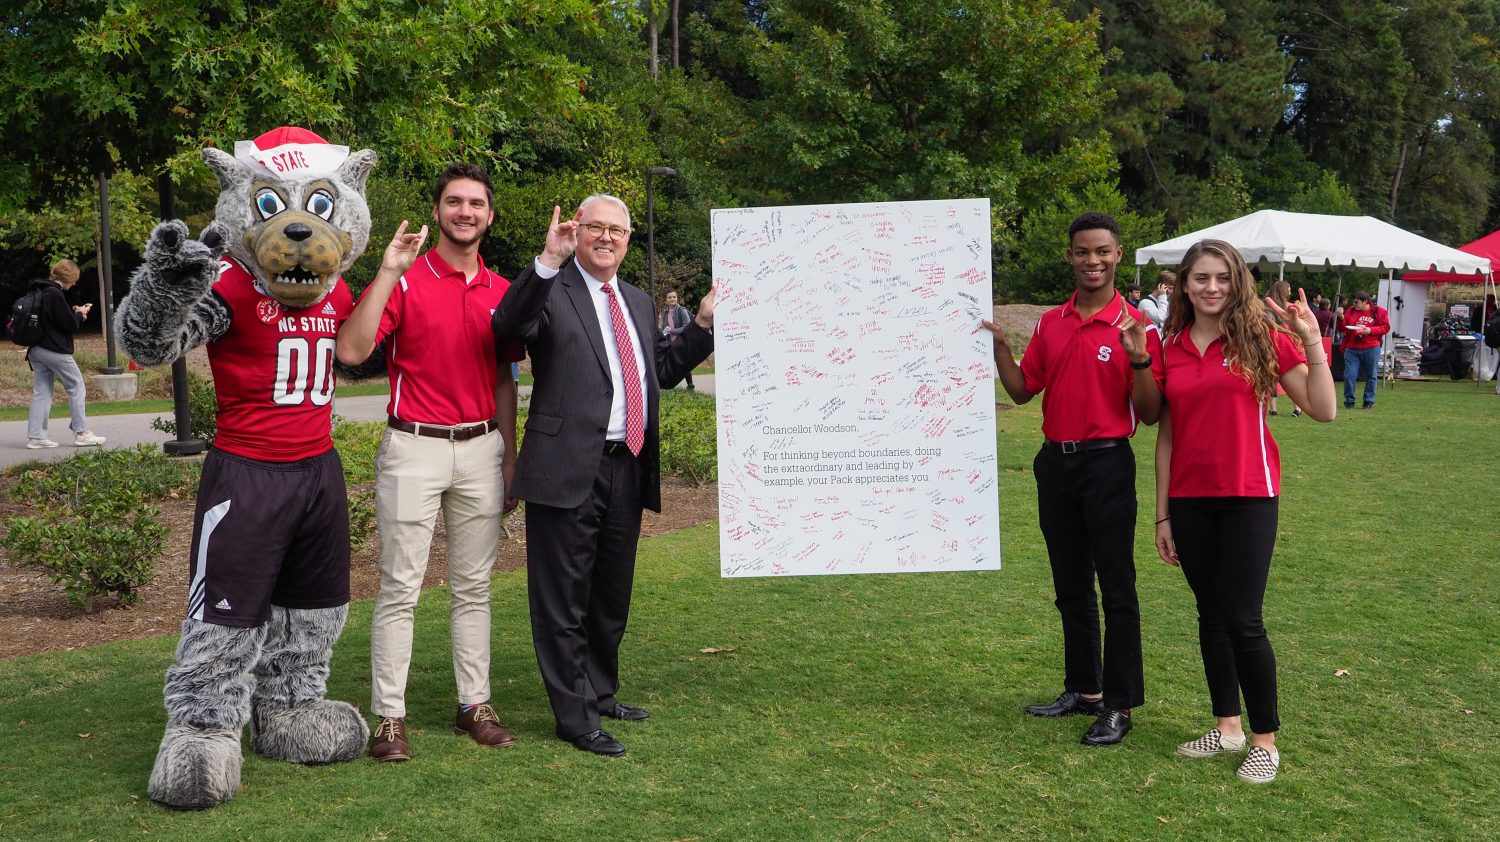 Mr. Wuf, students and Chancellor Woodson hold up a giant Pack Appreciation Card